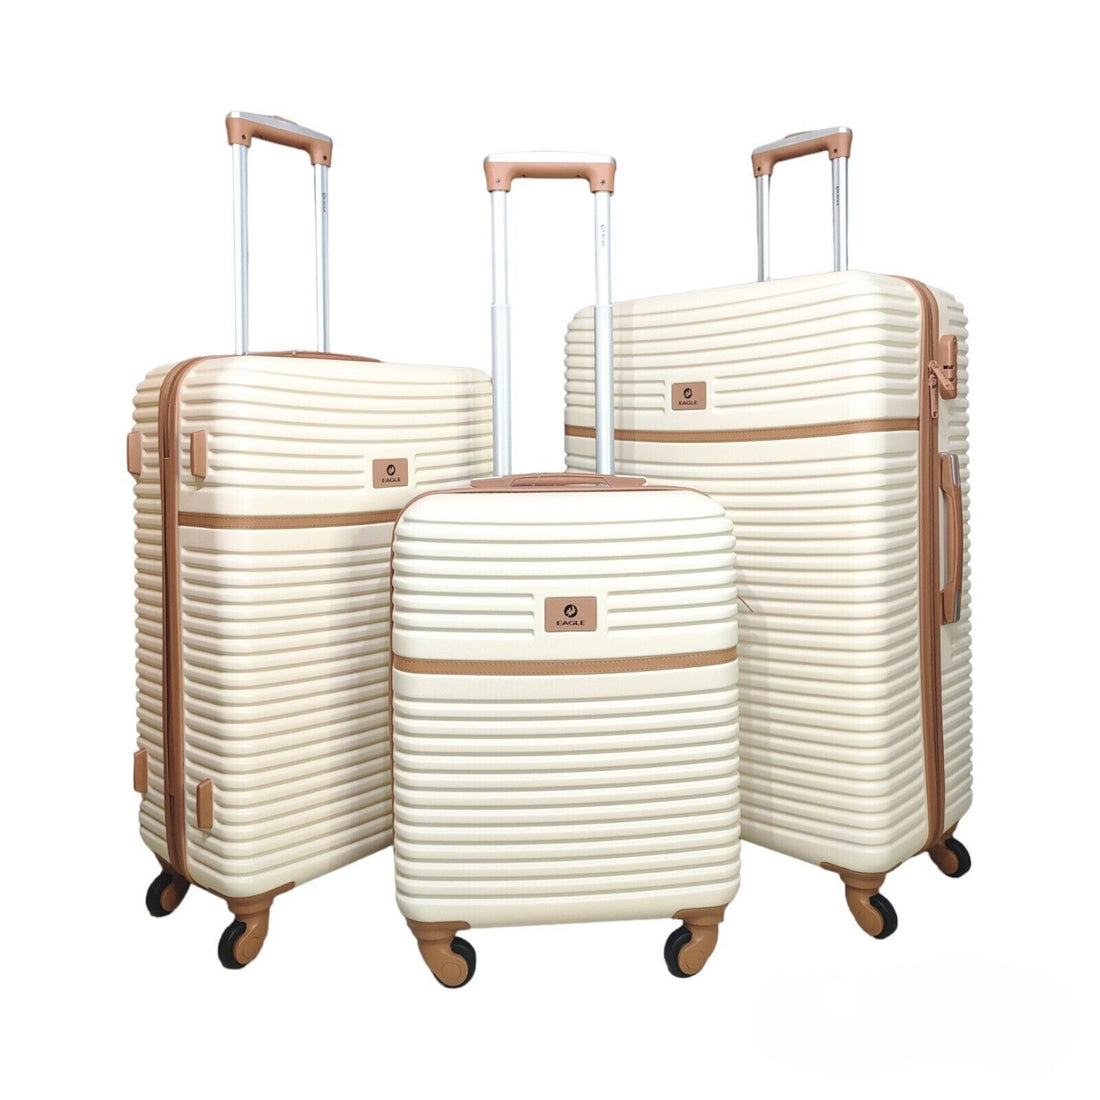 Hardshell Cabin Beige Suitcase Set Robust 4 Wheel ABS Luggage Travel Bag - Upperclass Fashions 